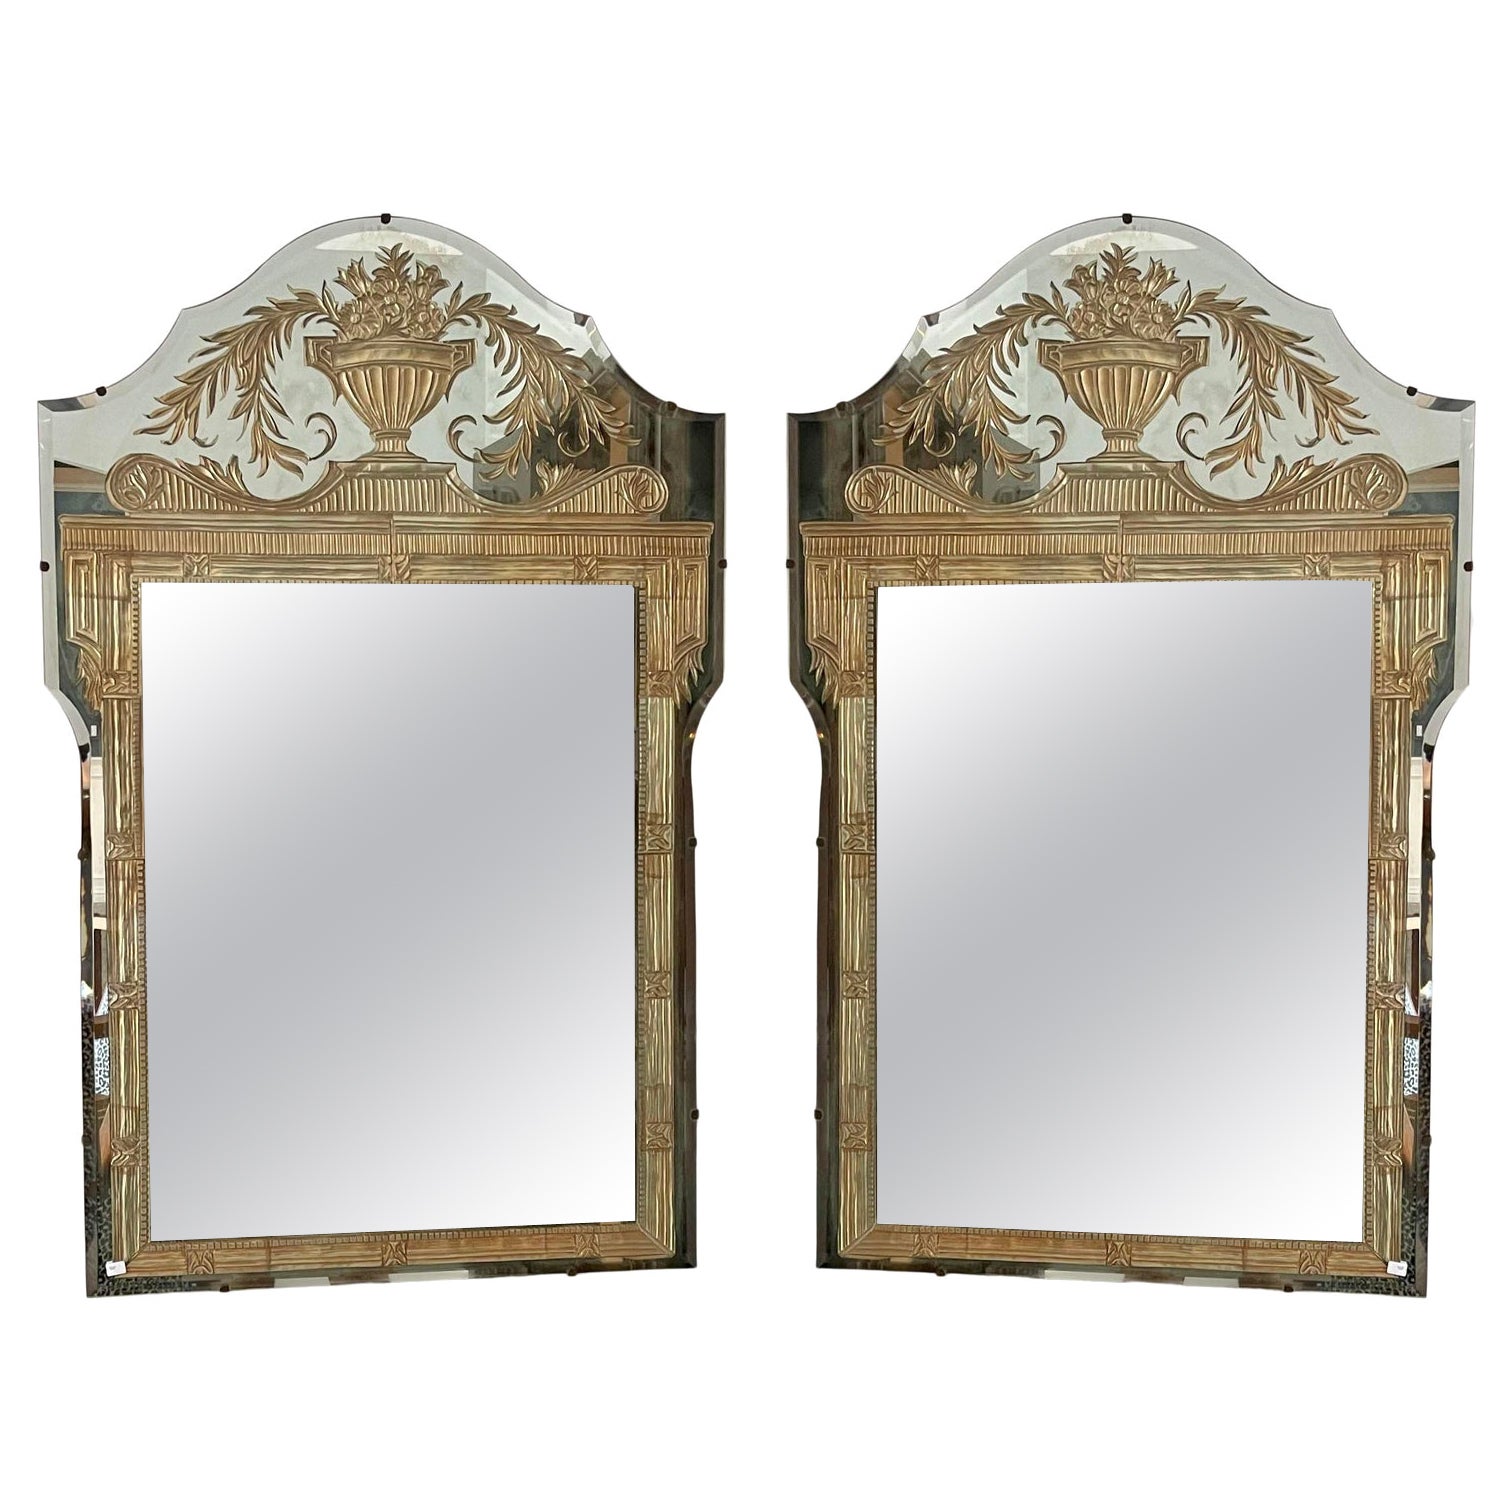 Vintage French Art Deco Eglomise Regency Mirrors, a Pair